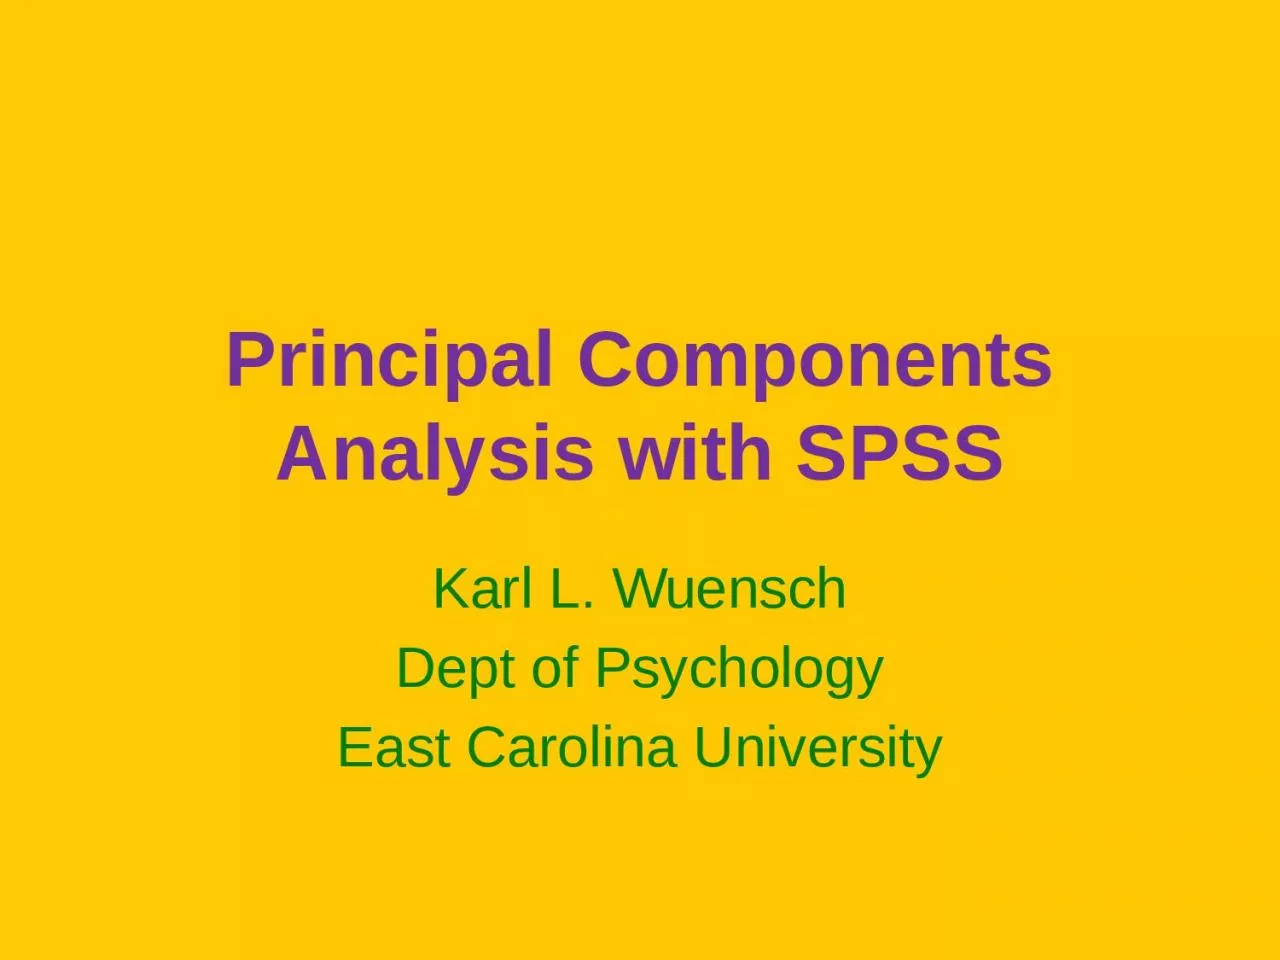 Principal Components Analysis with SPSS